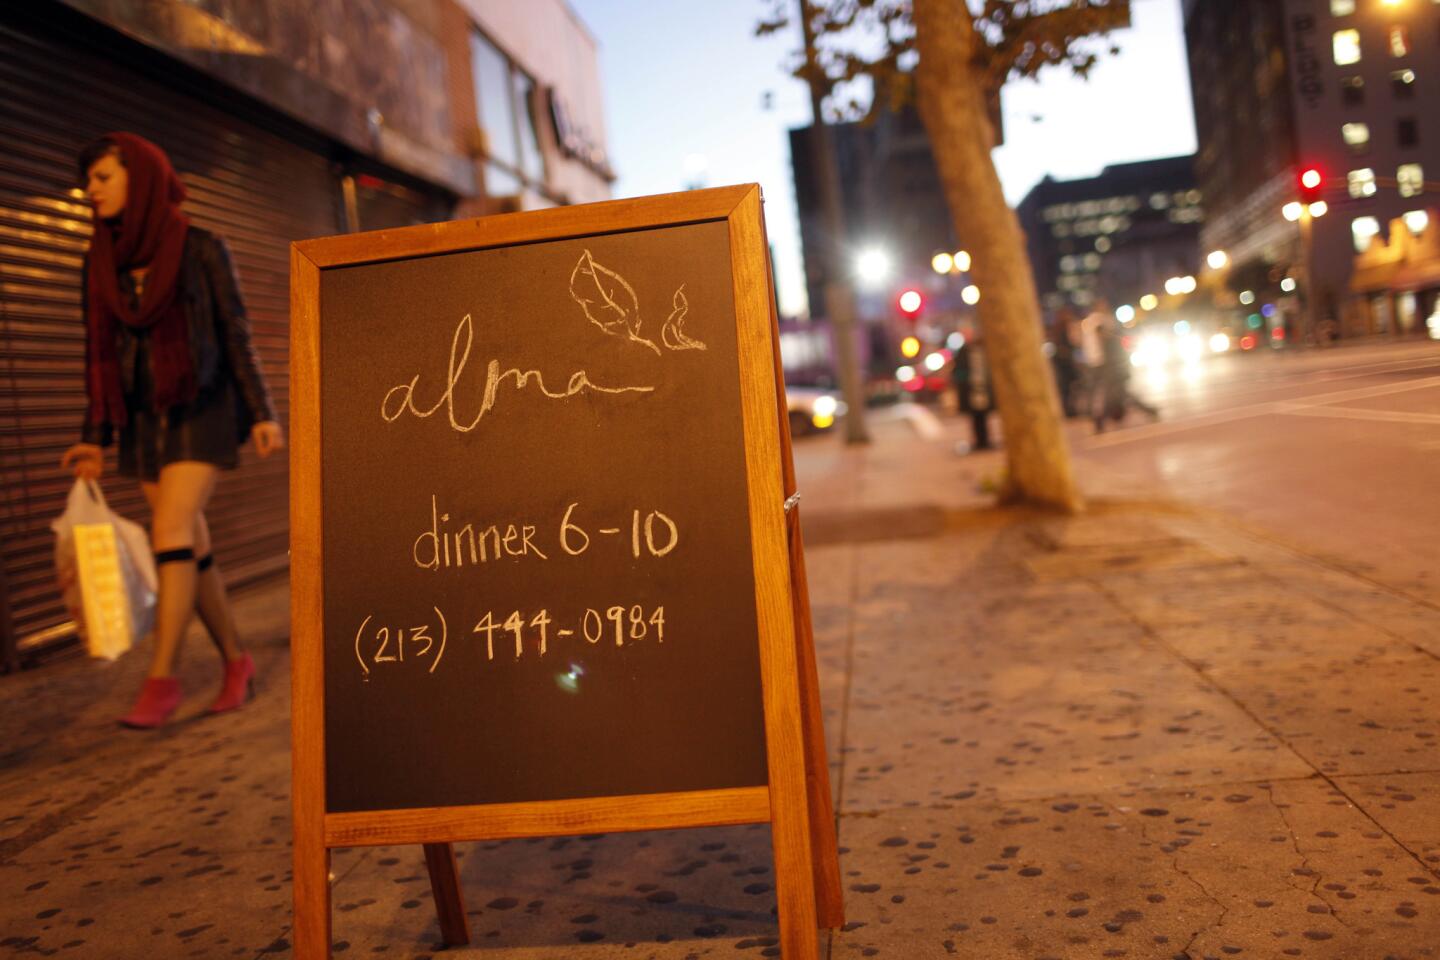 Located downtown on Broadway, Alma is unassuming from the outside, to say the least